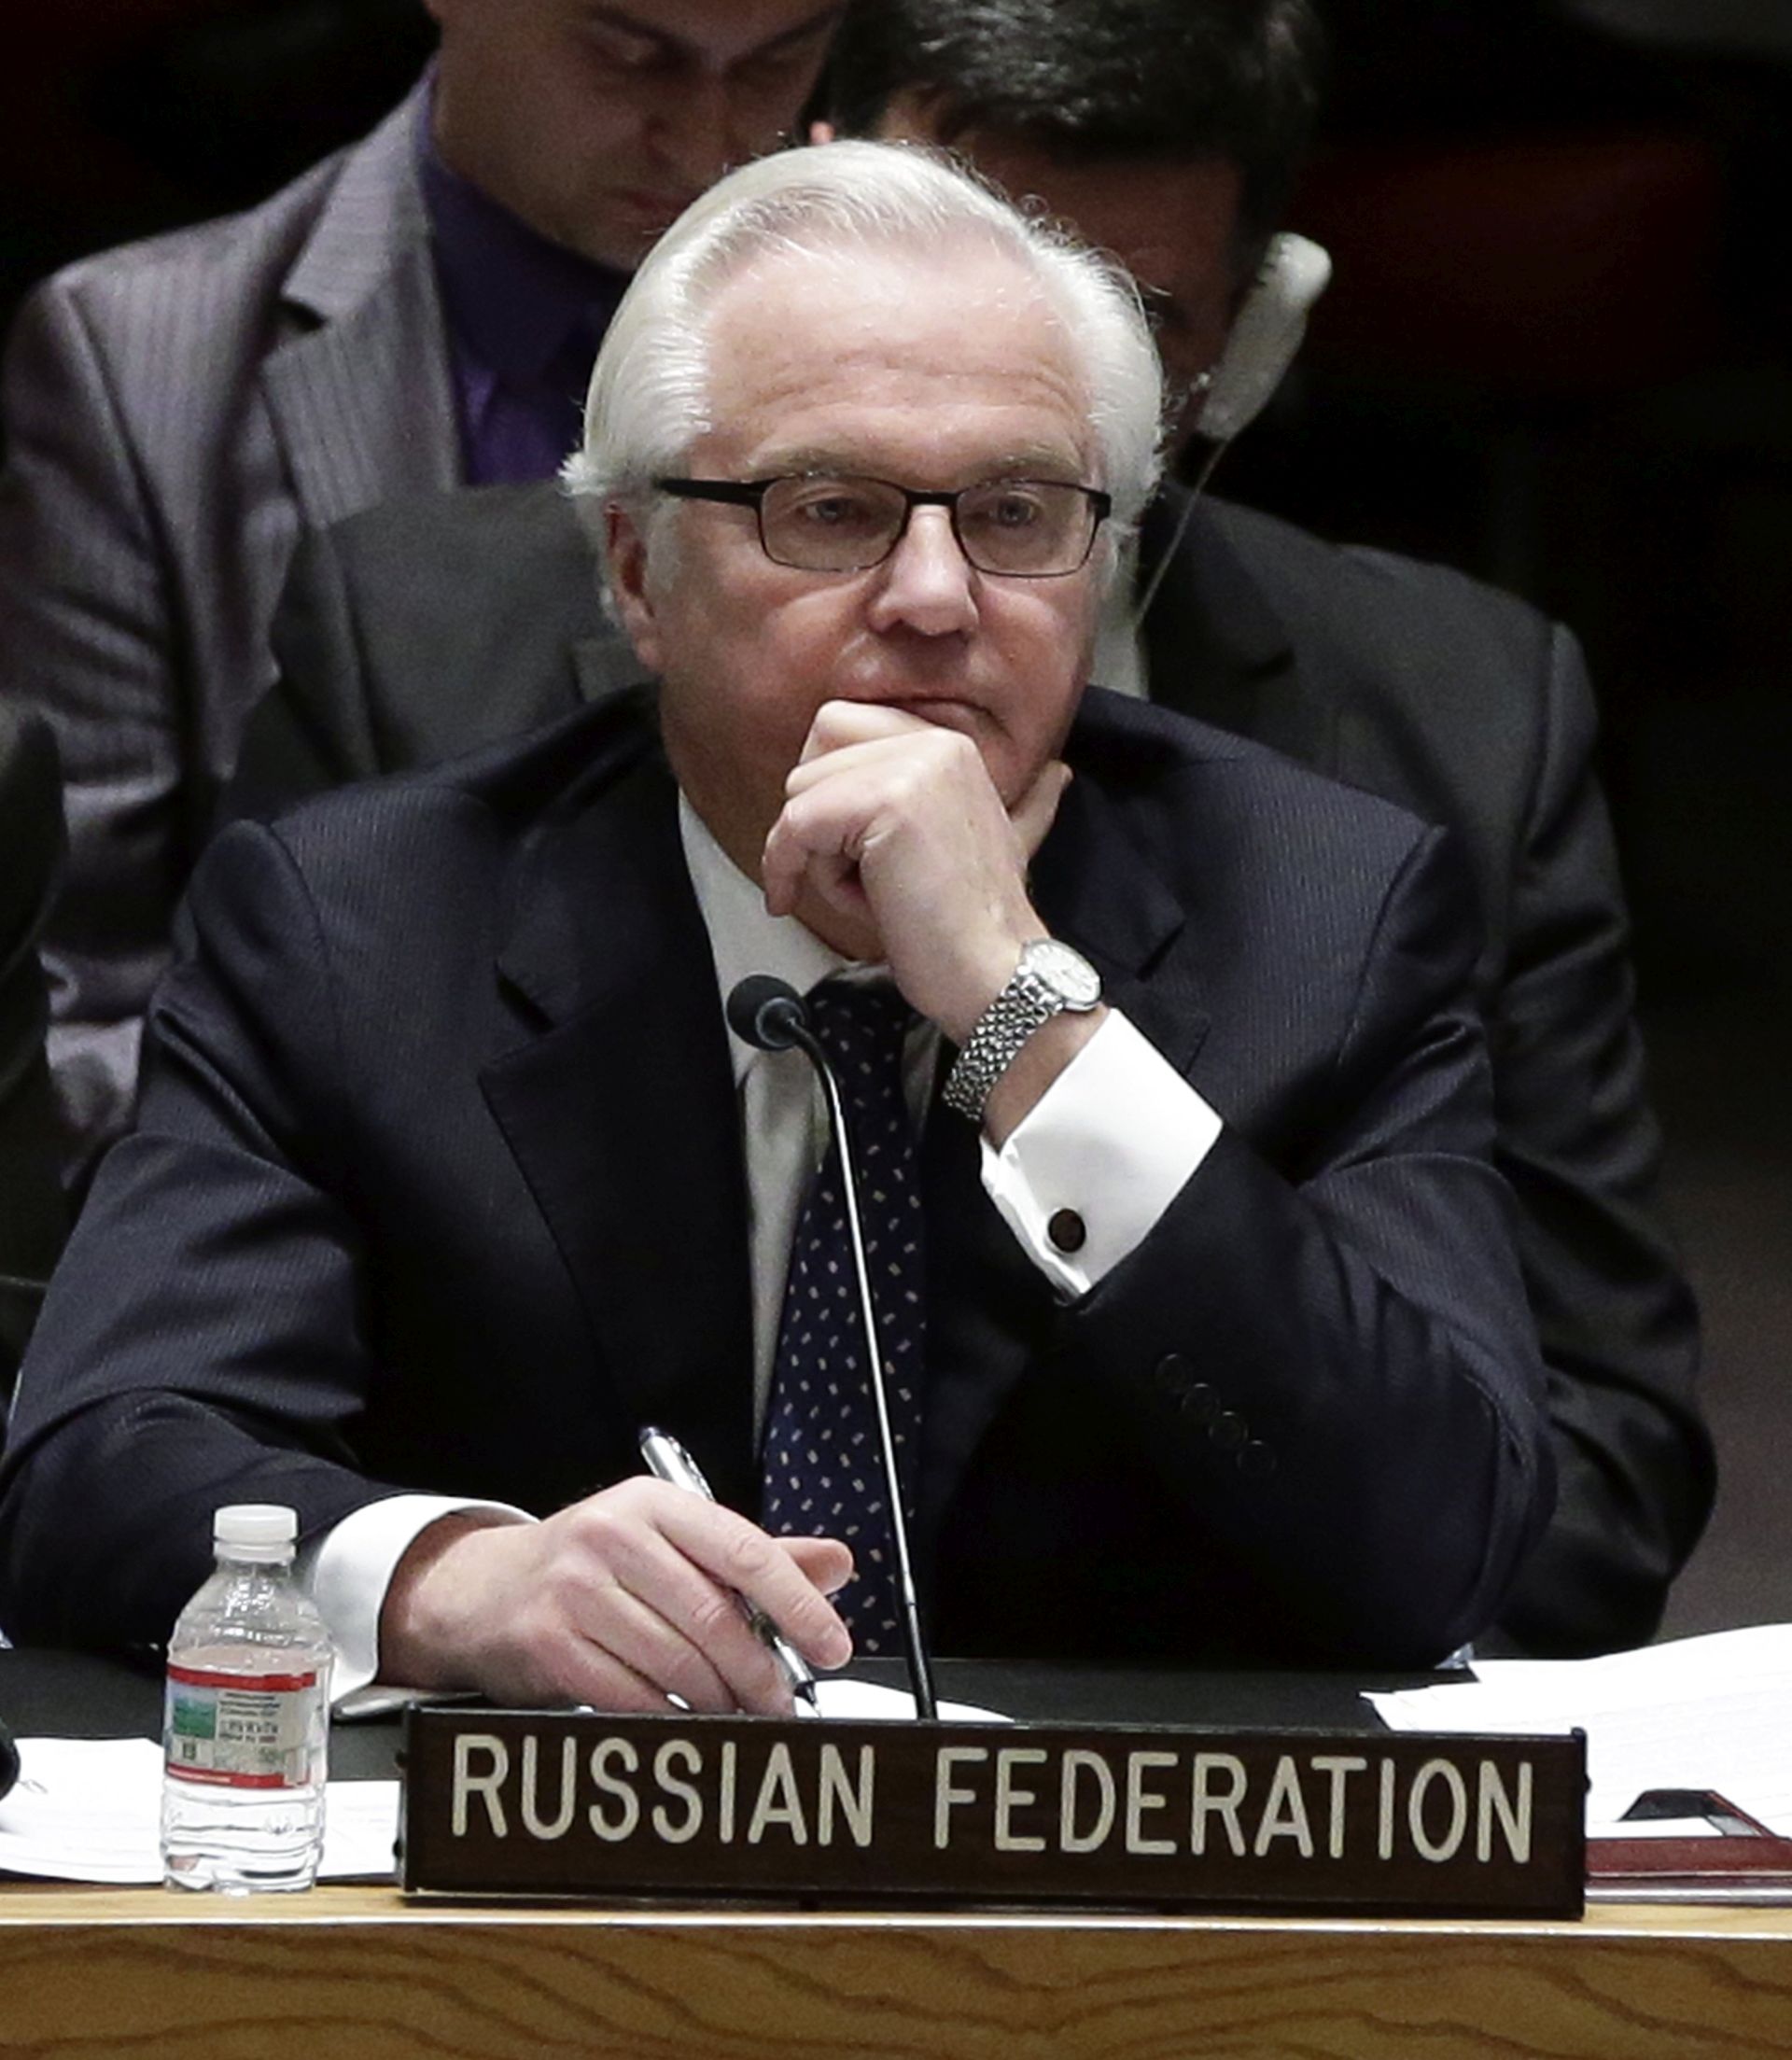 epa05805698 (FILE) - A file picture dated 13 April 2014 shows Russian Ambassador to the United Nations (UN) Vitaly Churkin during a UN Security Council meeting on the situation in the Ukraine, at the UN headquarters in New York City, New York, USA. Vitaly Churkin died at the age of 64 in New York, USA, according to a statement released by the Russian Foreign Ministry on 20 February 2017. Churkin 64, died a day before his 65th birthday.  EPA/JASON SZENES